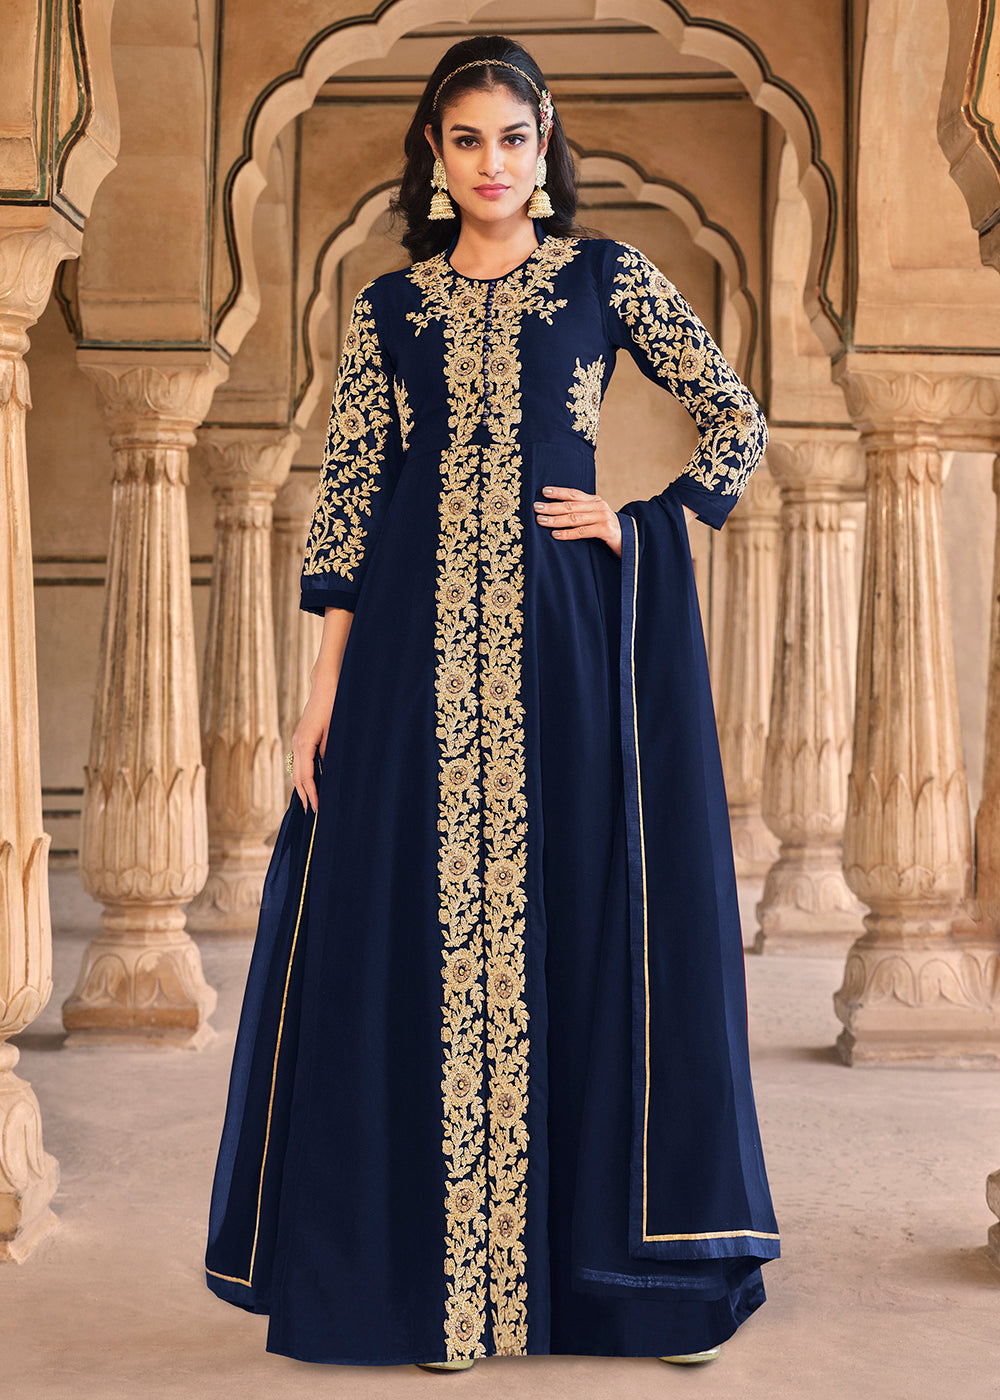 Buy Now Stone Embroidered Solid Navy Blue Slit Style Anarkali Suit Online in USA, UK, Australia, New Zealand, Canada, Italy & Worldwide at Empress Clothing. 